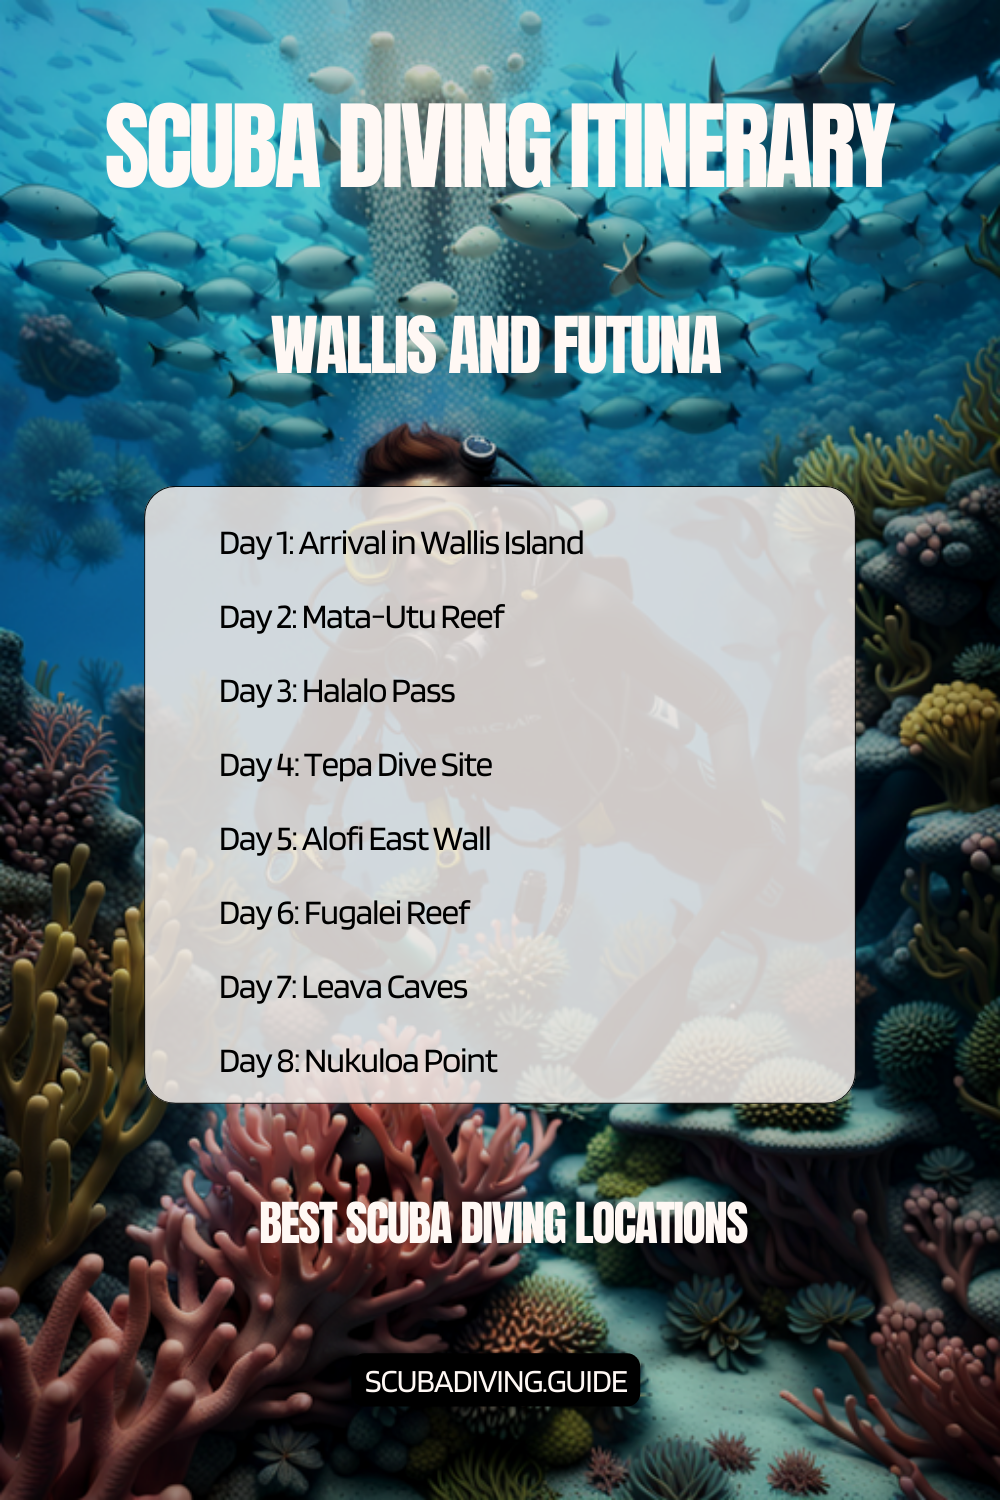 Wallis and Futuna Recommended Scuba Diving Itinerary